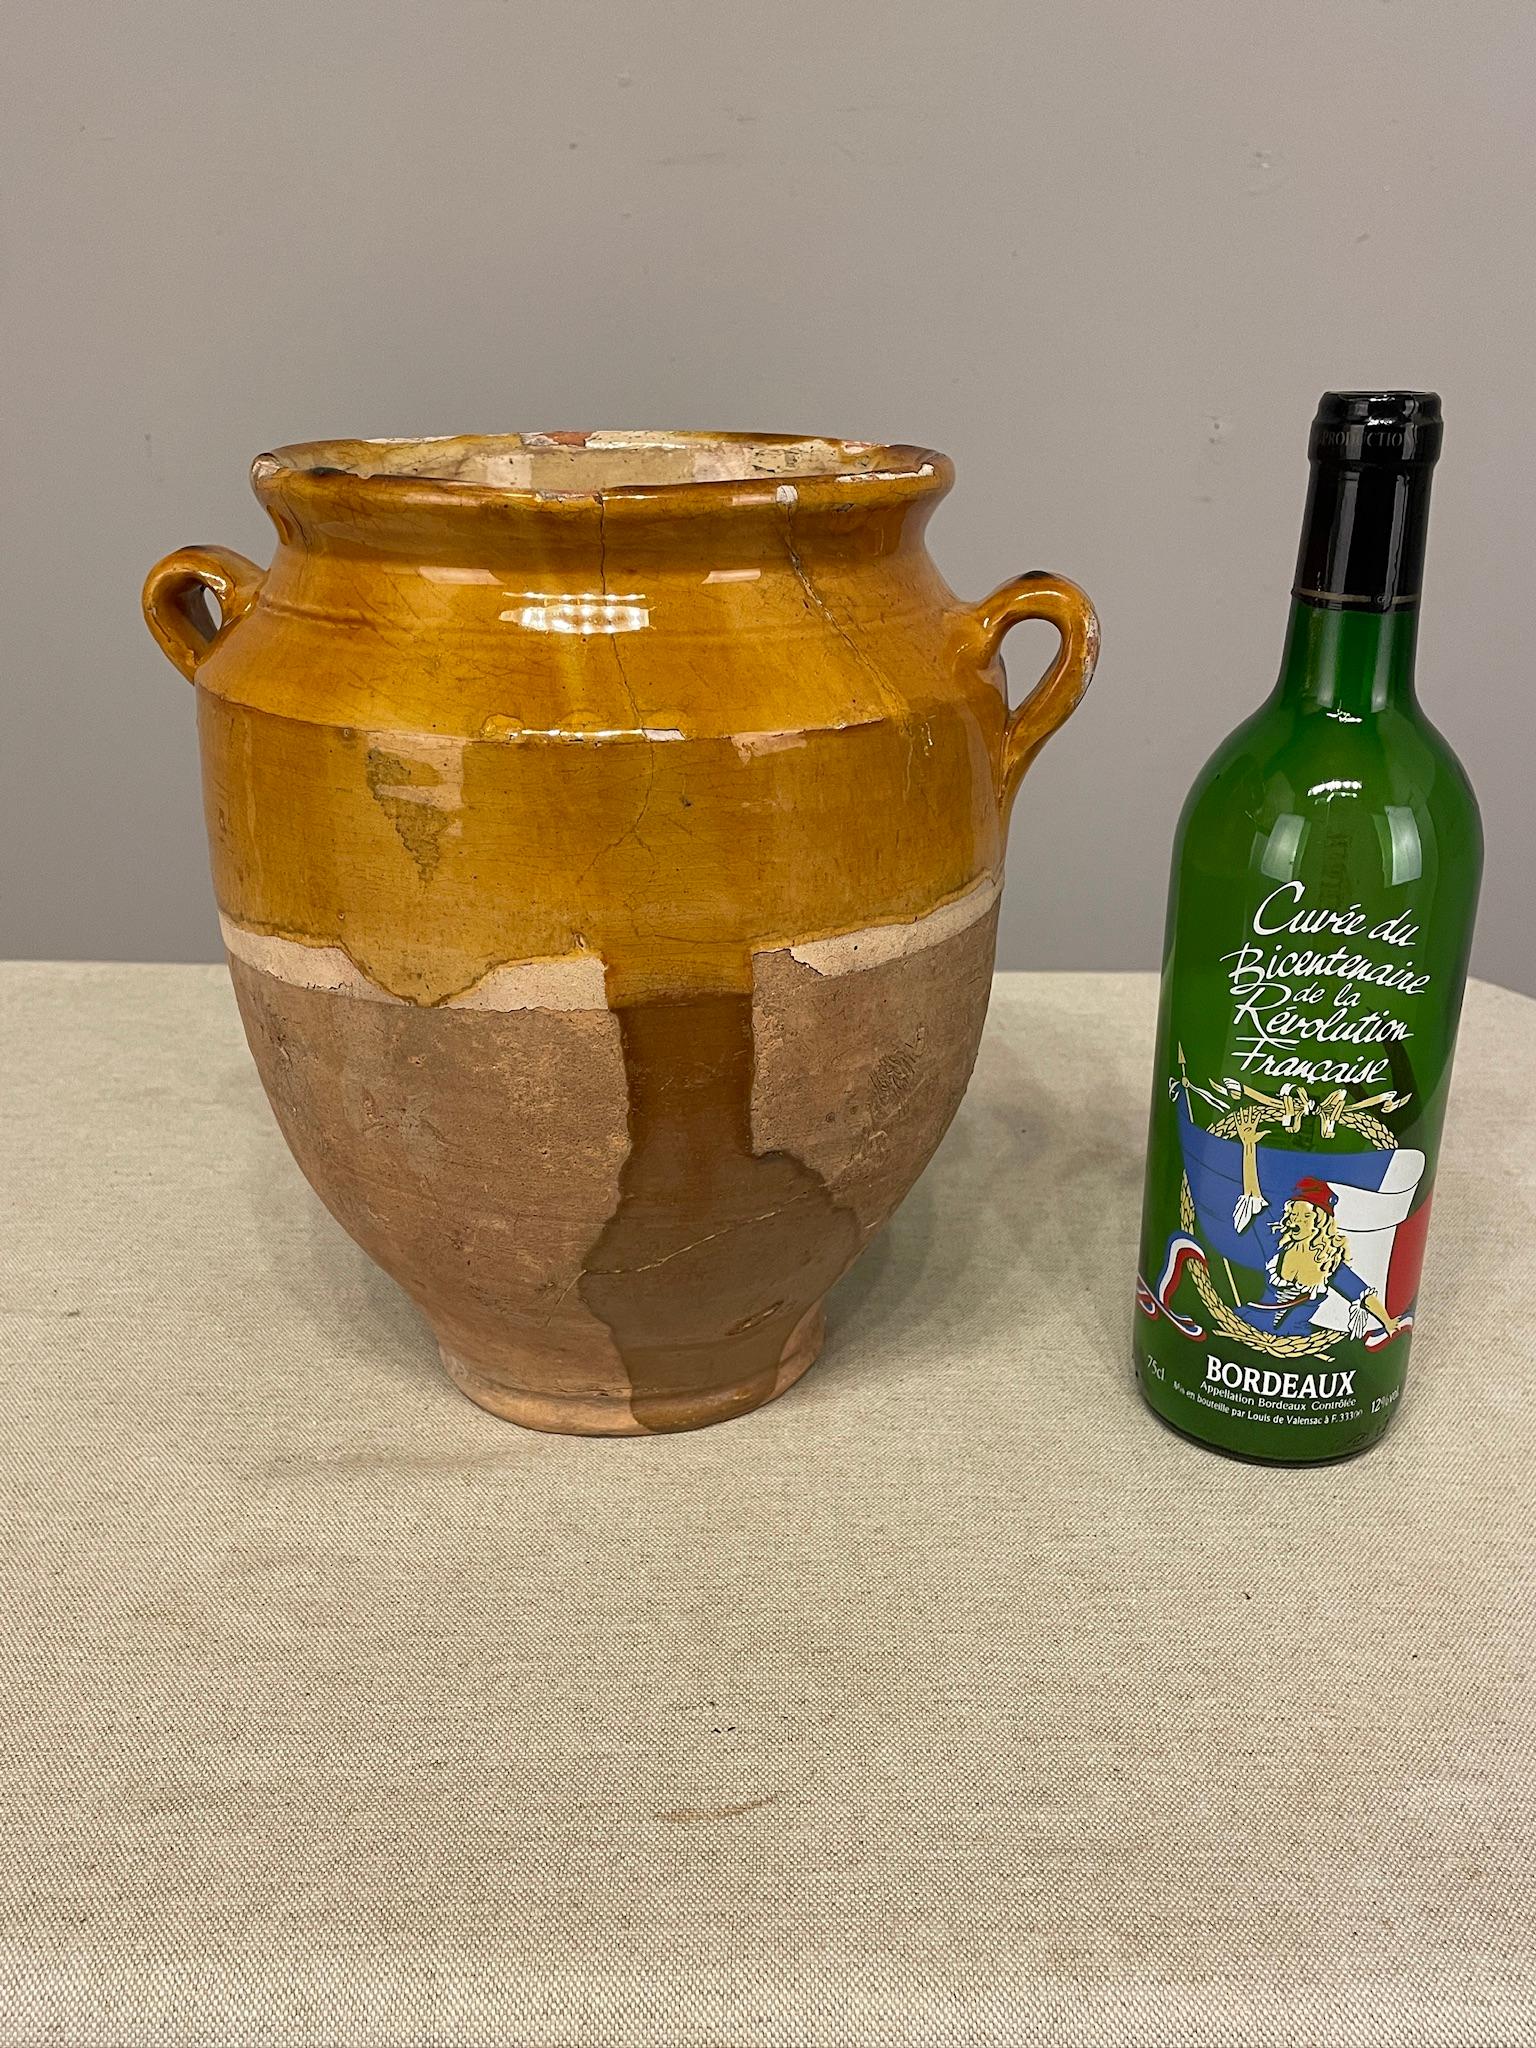 An earthenware confit pot from the Southwest of France with traditional yellow, ochre glaze with green drips. Minor chips and losses to glaze. These ordinary earthenware vessels were once used daily in the French country home and have beautiful